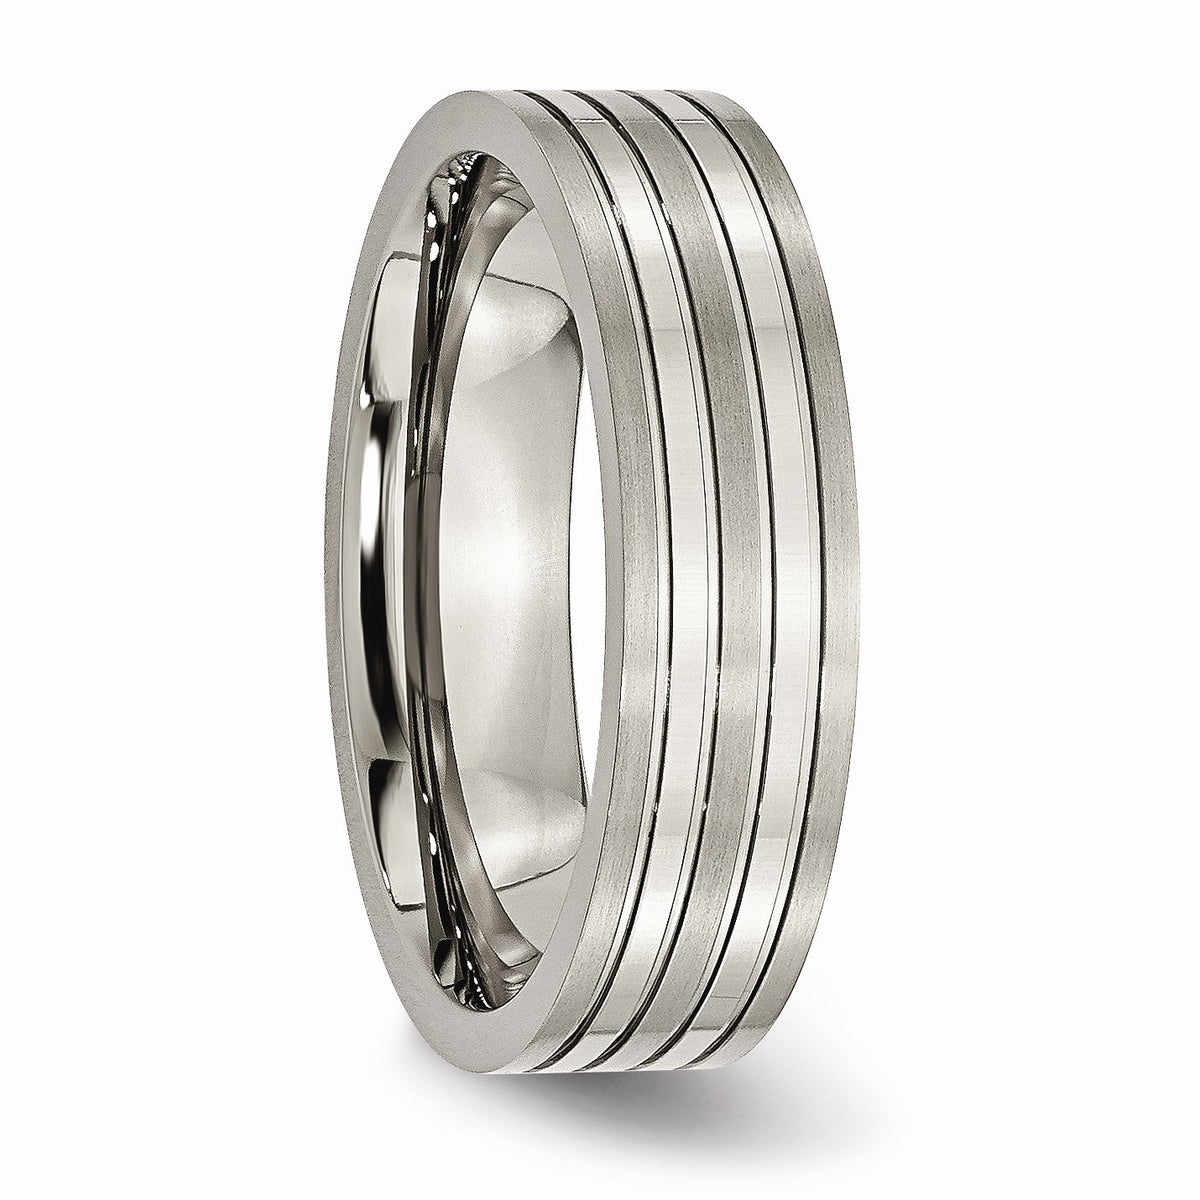 Alternate view of the Titanium 6mm Grooved Multi Finished Comfort Fit Band by The Black Bow Jewelry Co.